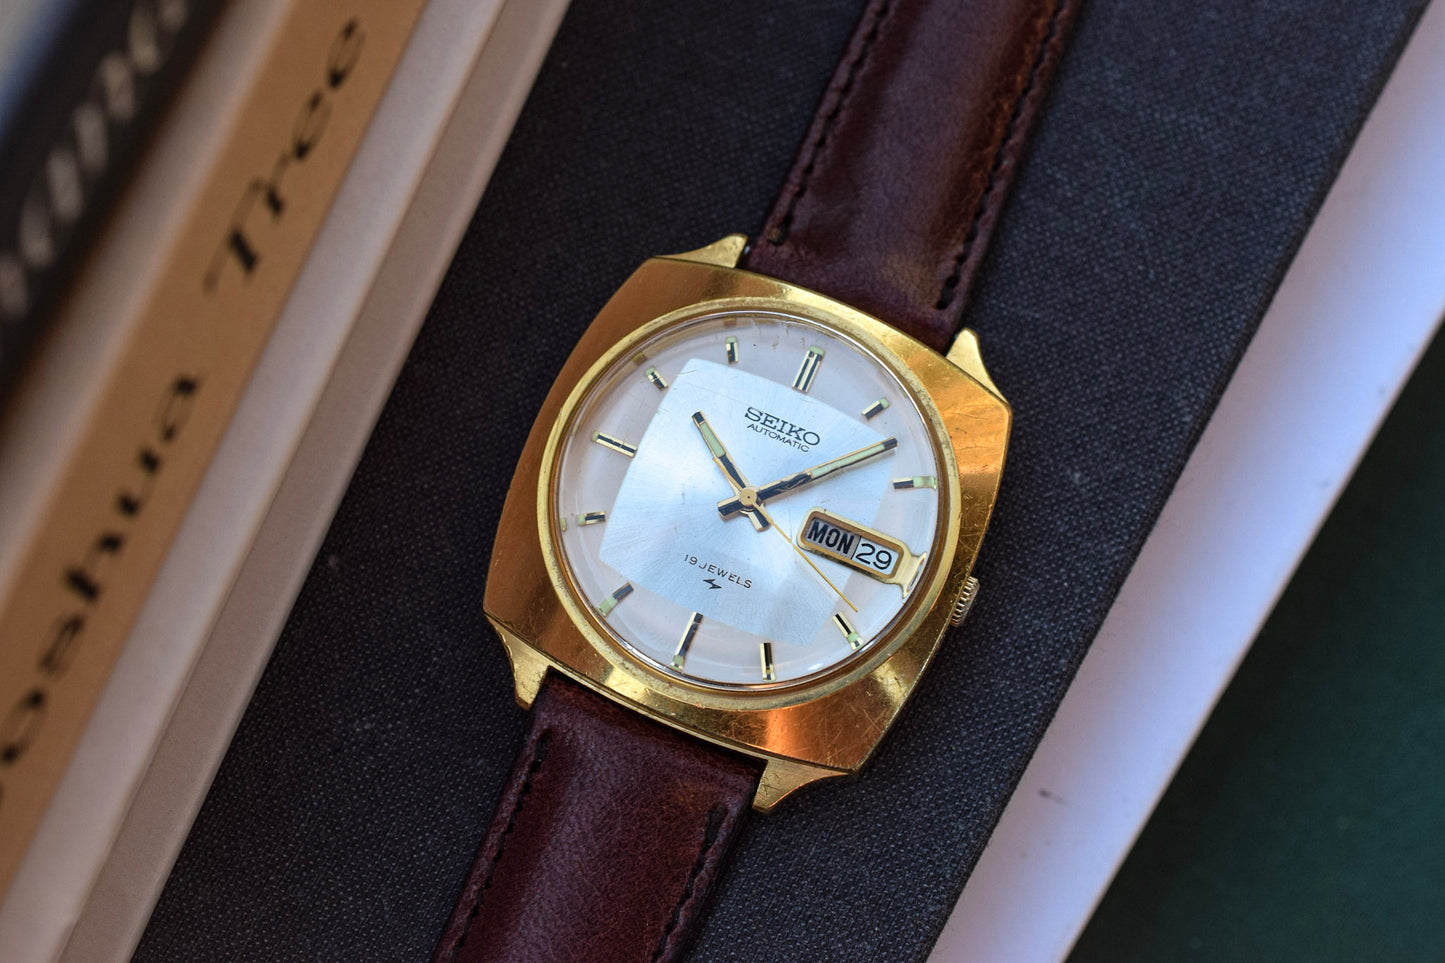 1976 Seiko Automatic Gold-Tone Day/Date Watch